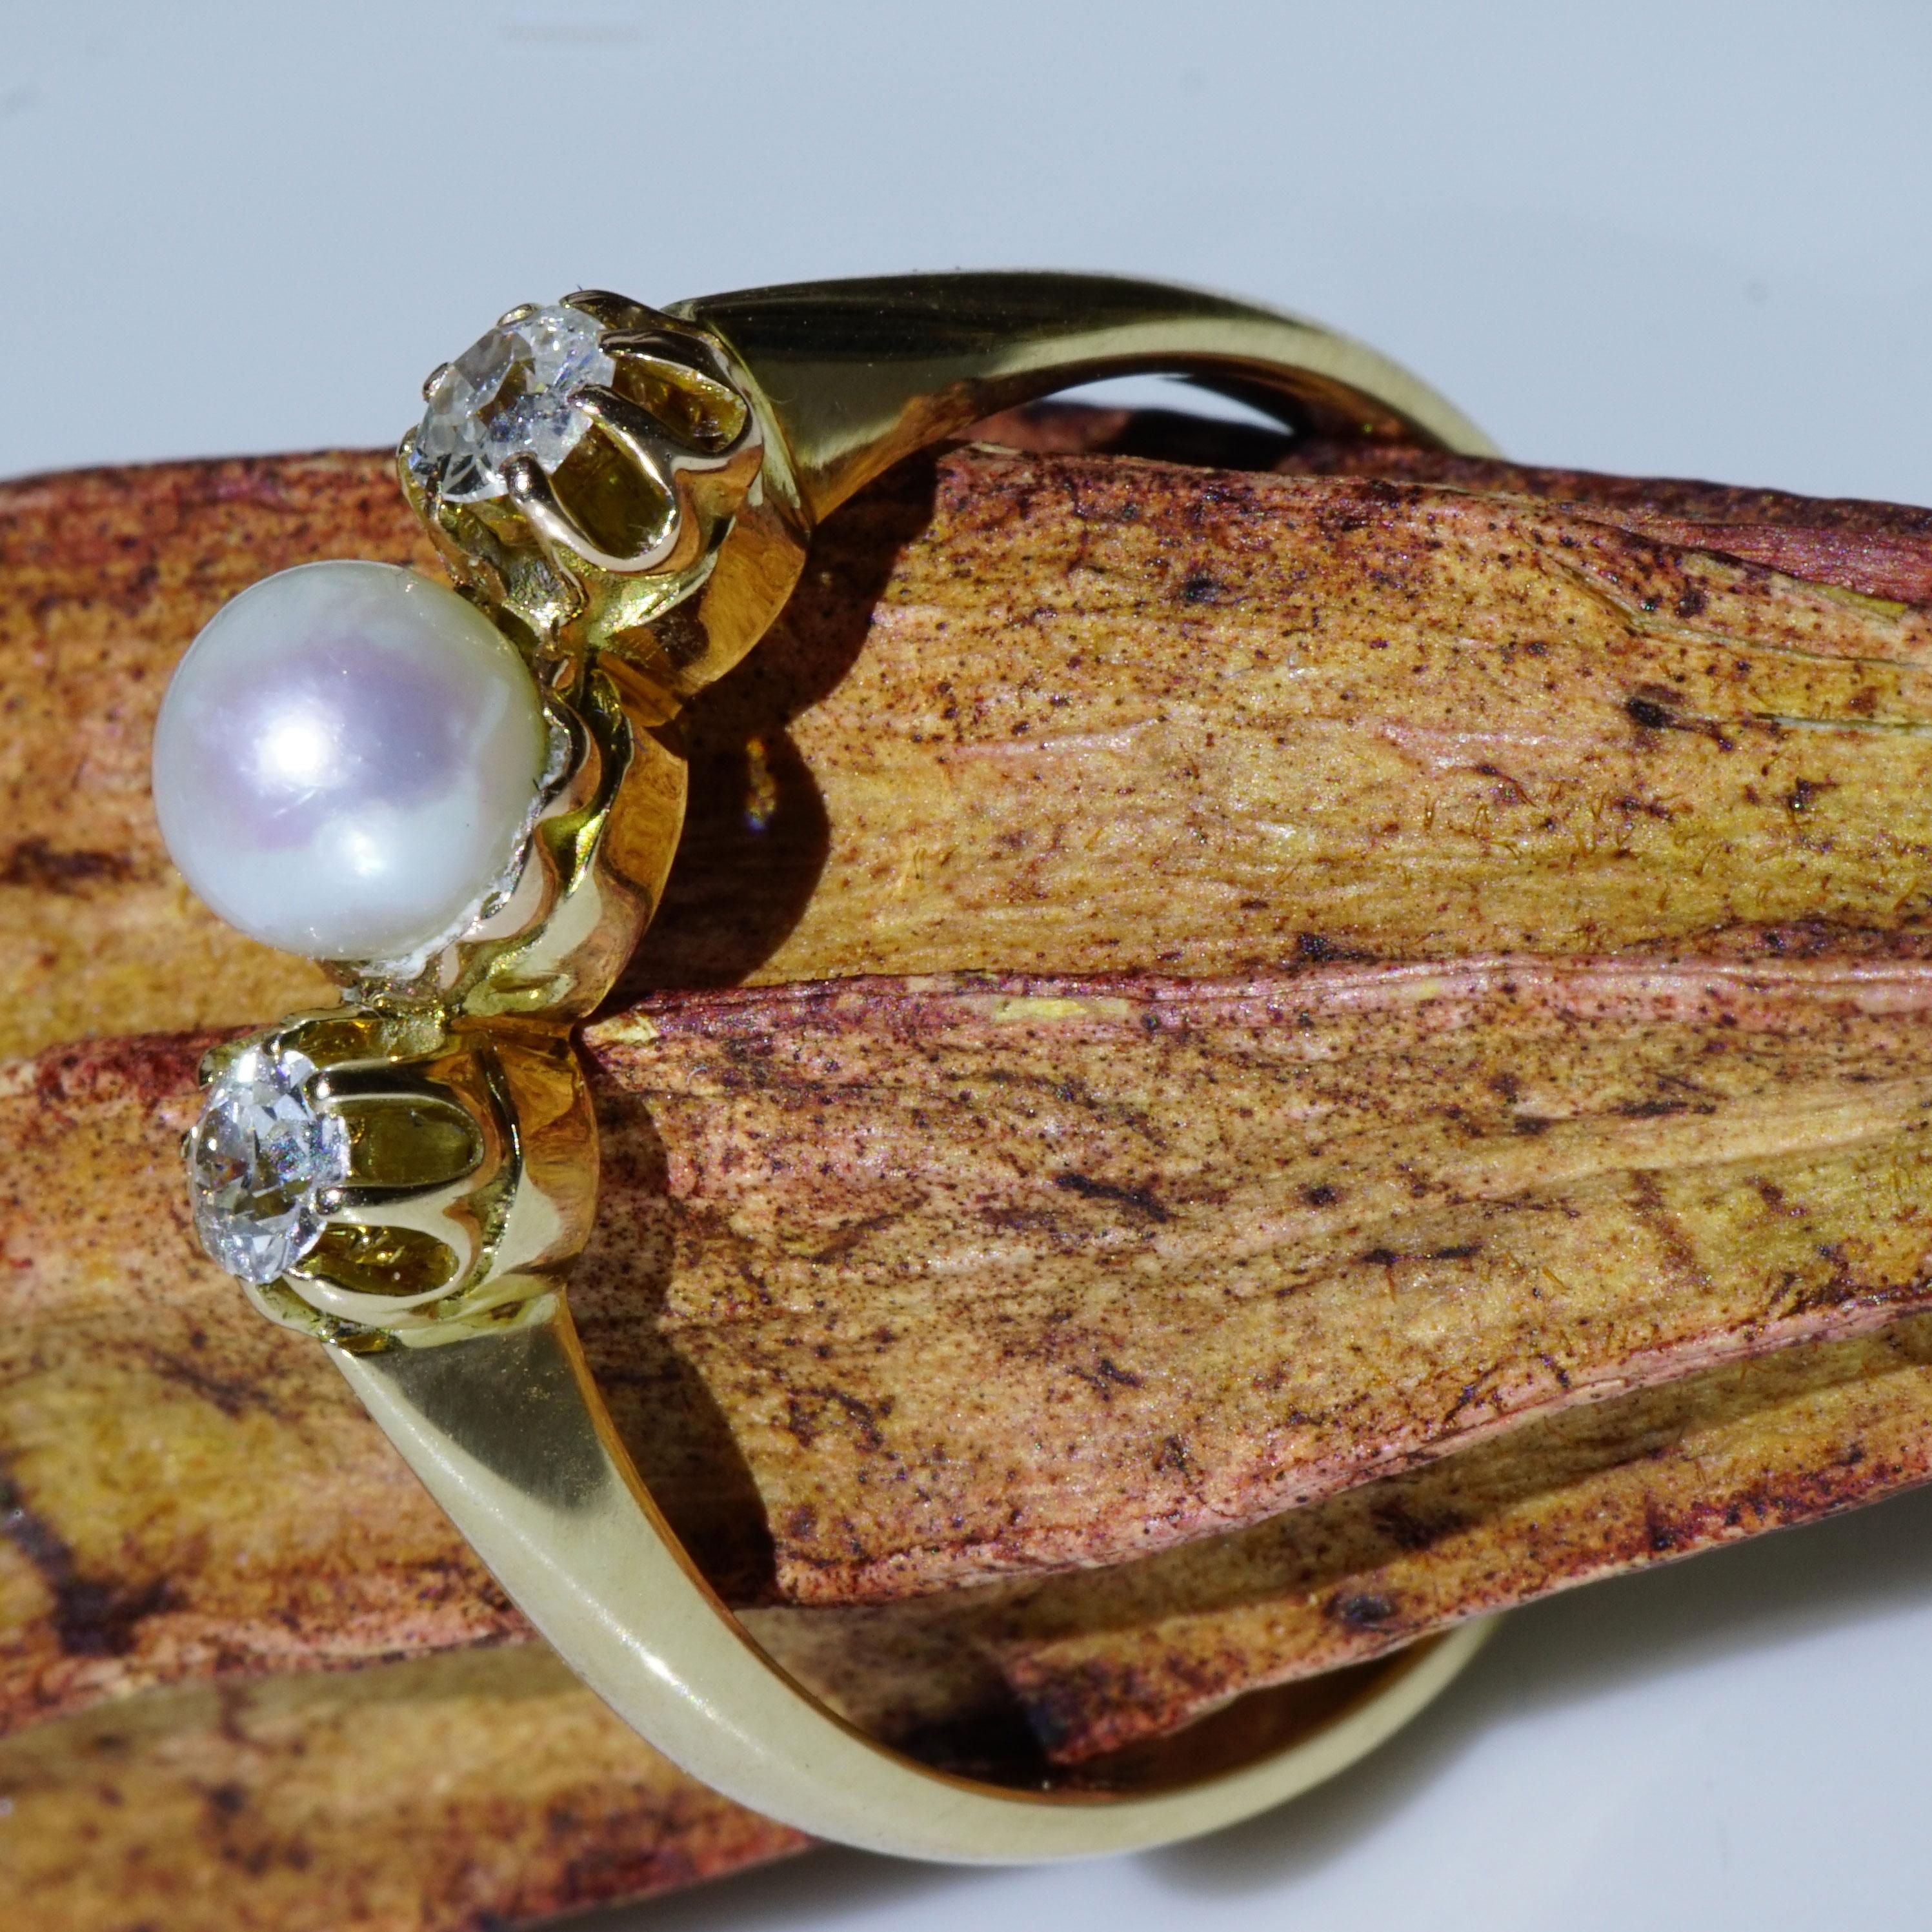 Old Cut Diamond Pearl Ring 0.20 ct Yellow Gold about 1910 fine white/pink Pearl For Sale 6